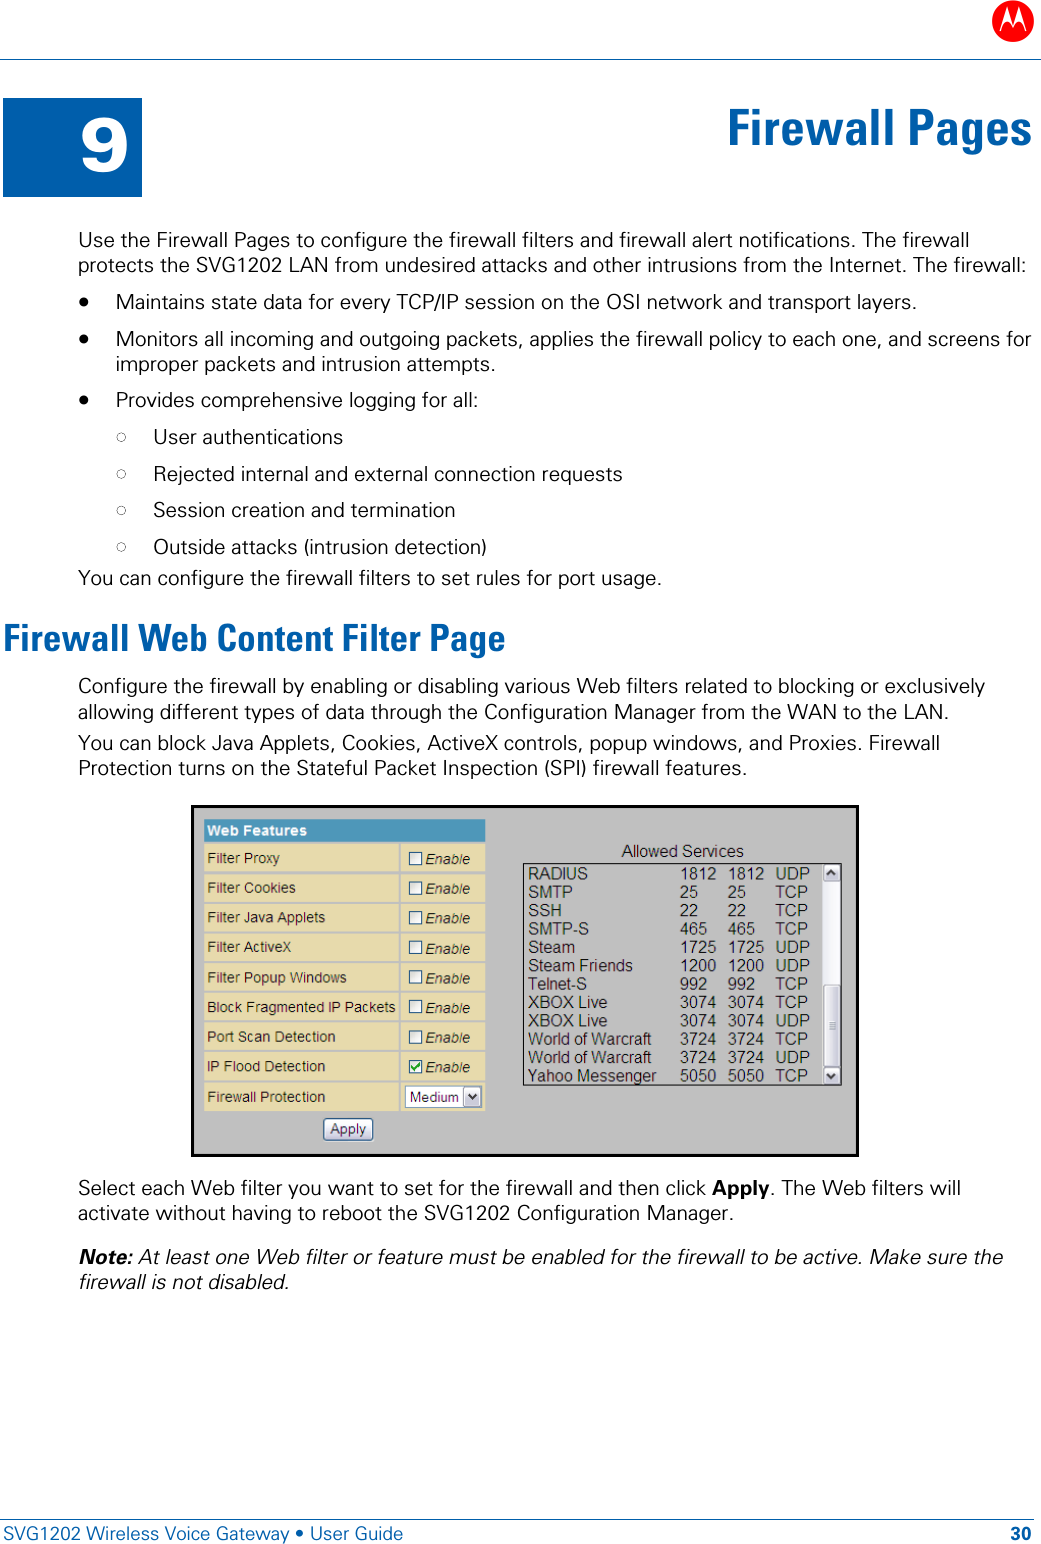 B   SVG1202 Wireless Voice Gateway • User Guide 30  9 Firewall Pages  Use the Firewall Pages to configure the firewall filters and firewall alert notifications. The firewall protects the SVG1202 LAN from undesired attacks and other intrusions from the Internet. The firewall: • Maintains state data for every TCP/IP session on the OSI network and transport layers. • Monitors all incoming and outgoing packets, applies the firewall policy to each one, and screens for improper packets and intrusion attempts. • Provides comprehensive logging for all: • User authentications • Rejected internal and external connection requests • Session creation and termination • Outside attacks (intrusion detection) You can configure the firewall filters to set rules for port usage.  Firewall Web Content Filter Page Configure the firewall by enabling or disabling various Web filters related to blocking or exclusively allowing different types of data through the Configuration Manager from the WAN to the LAN. You can block Java Applets, Cookies, ActiveX controls, popup windows, and Proxies. Firewall Protection turns on the Stateful Packet Inspection (SPI) firewall features.      Select each Web filter you want to set for the firewall and then click Apply. The Web filters will activate without having to reboot the SVG1202 Configuration Manager. Note: At least one Web filter or feature must be enabled for the firewall to be active. Make sure the firewall is not disabled. 